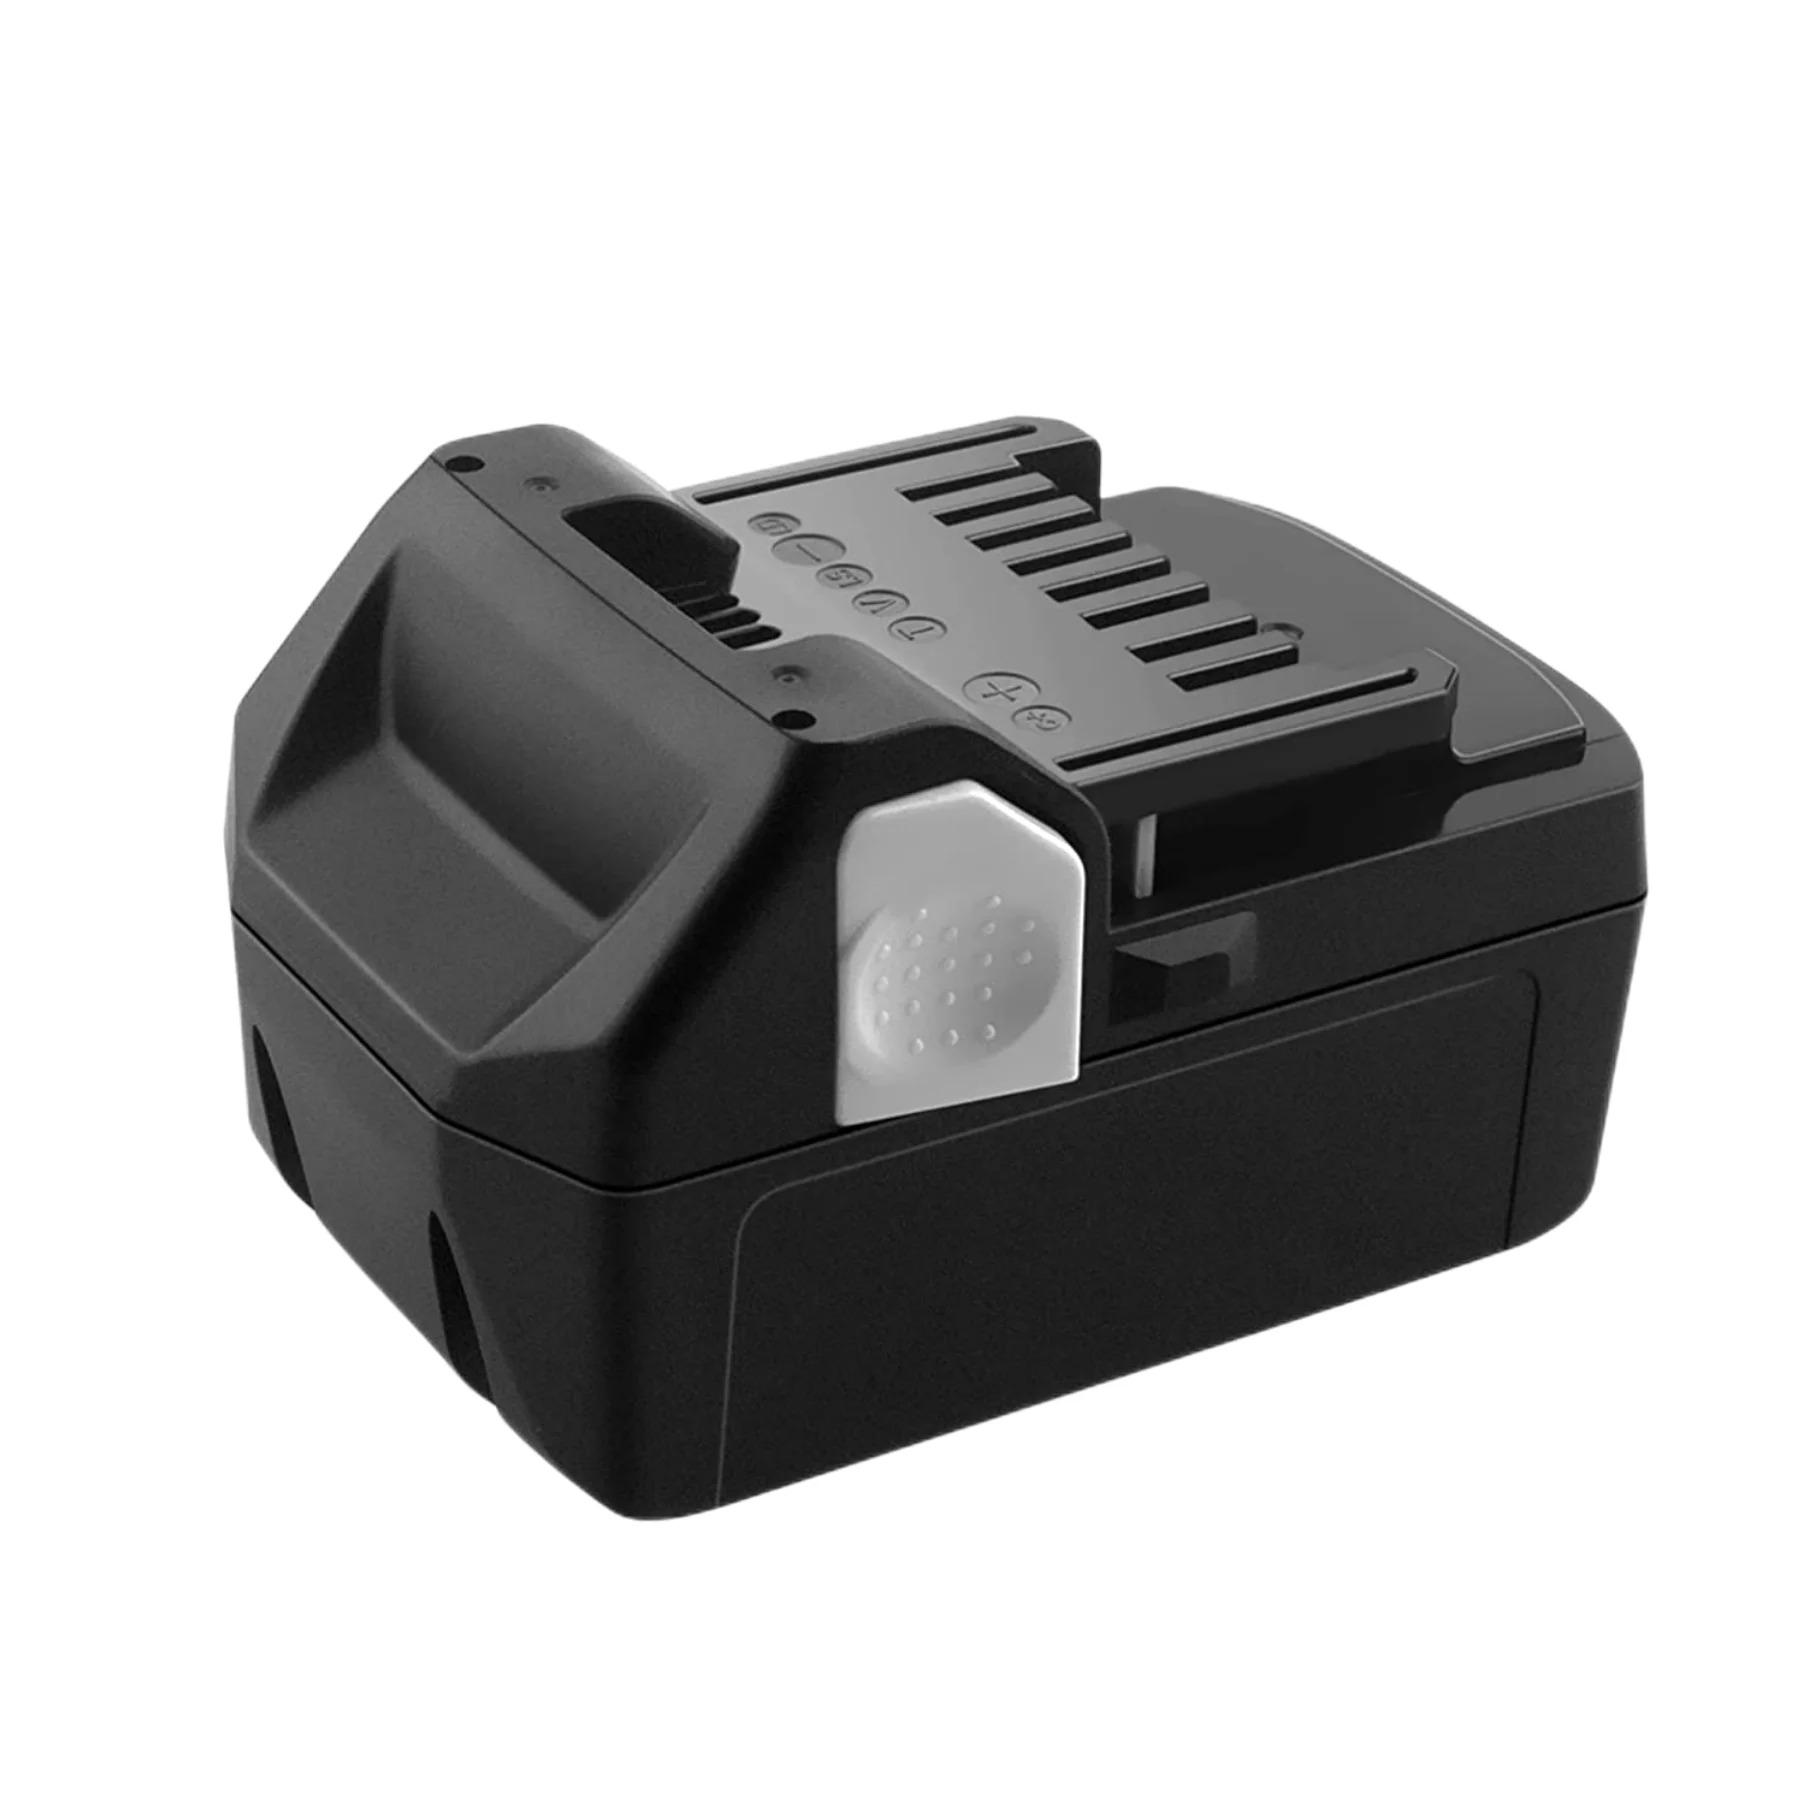 

18V 6.0 Ah Lithium-ion Cordless Drill Tool Battery for BCL1815 EBM1830 BSL1840 BSL1850 battery